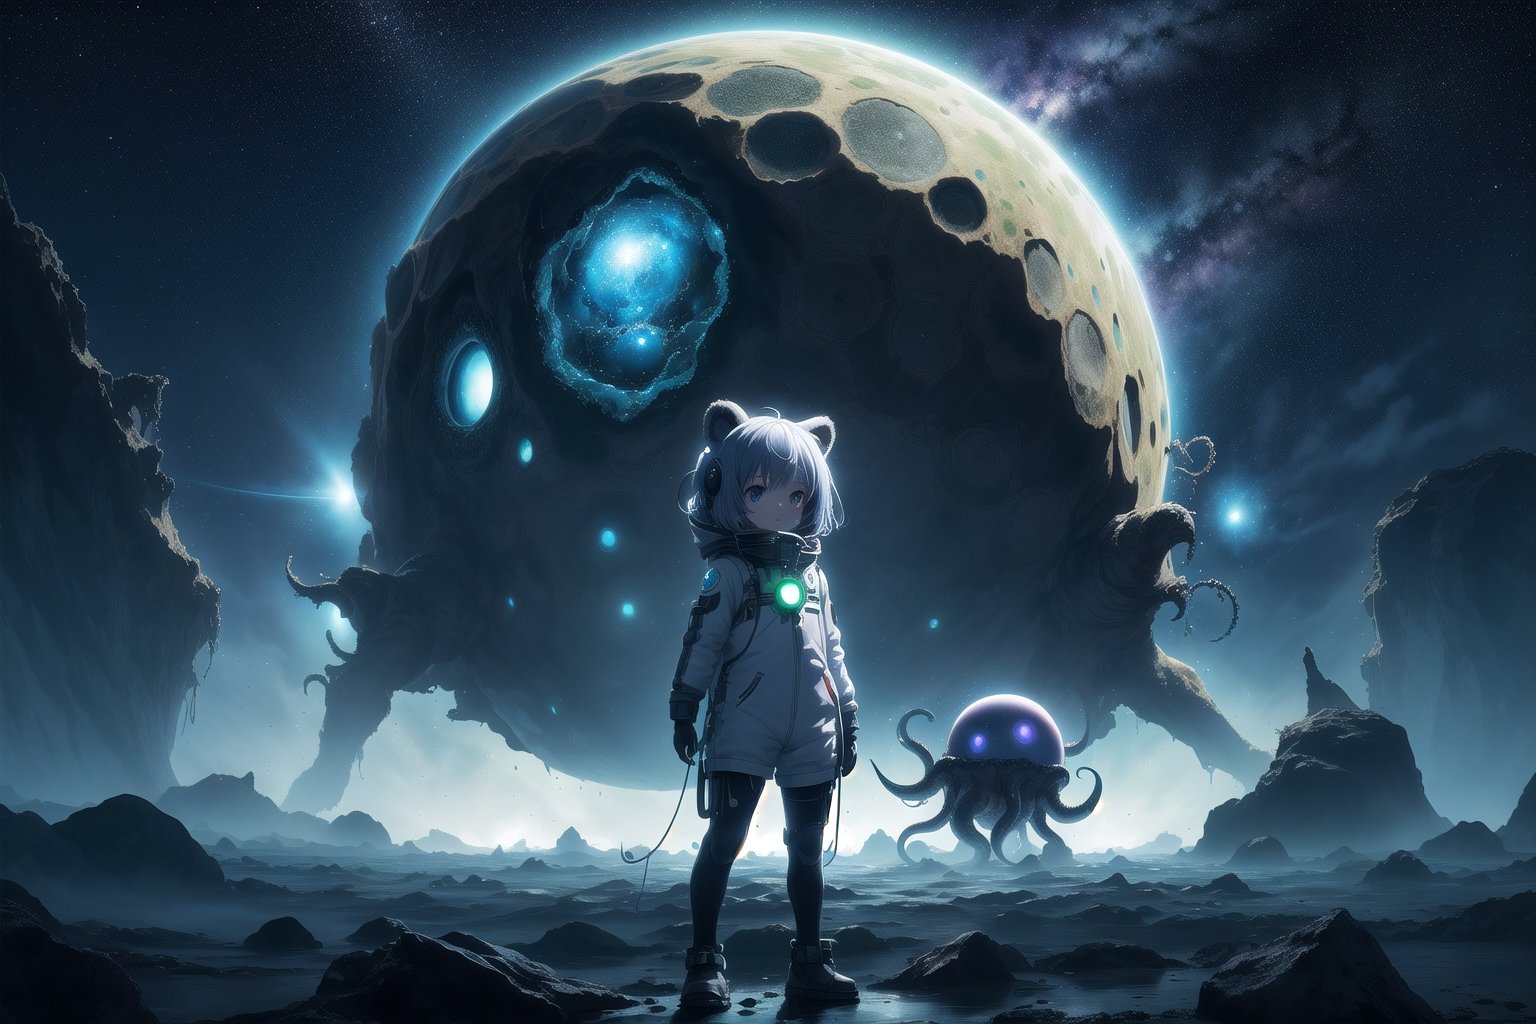 Chibi girl in a spacesuit left frame, cute racoon ears, award winning cinematic, a chibi girl with racoon ears standing in front of a Giant cthulhu monster, tentacle on face, ominous cthulhu, | fantasy colors, sky full of stars, night, spaceship on the ocean, low hanging fog, lovecraft inspired, key anime Visual by kentaro Miura, alien planet, alien world, trippy colors, | bokeh, depht of field, vivid background colors, key anime Visual by kentaro miura